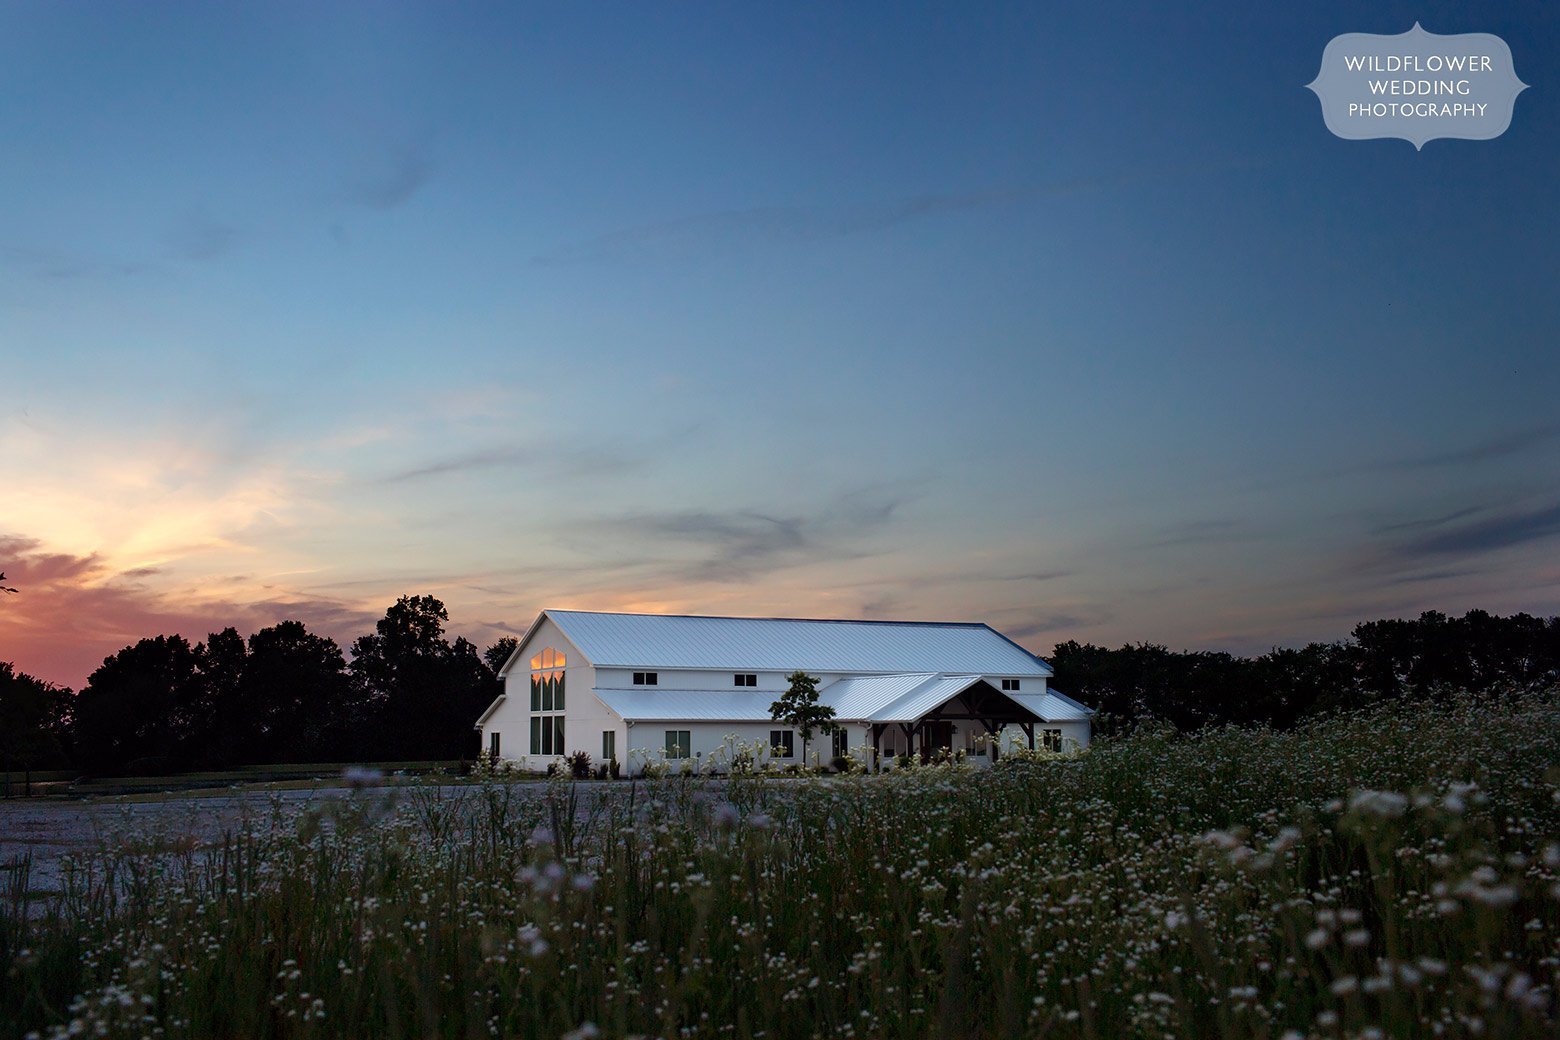 Twilight and wildflowers view of the Emerson Fields wedding venue in mid-Missouri.